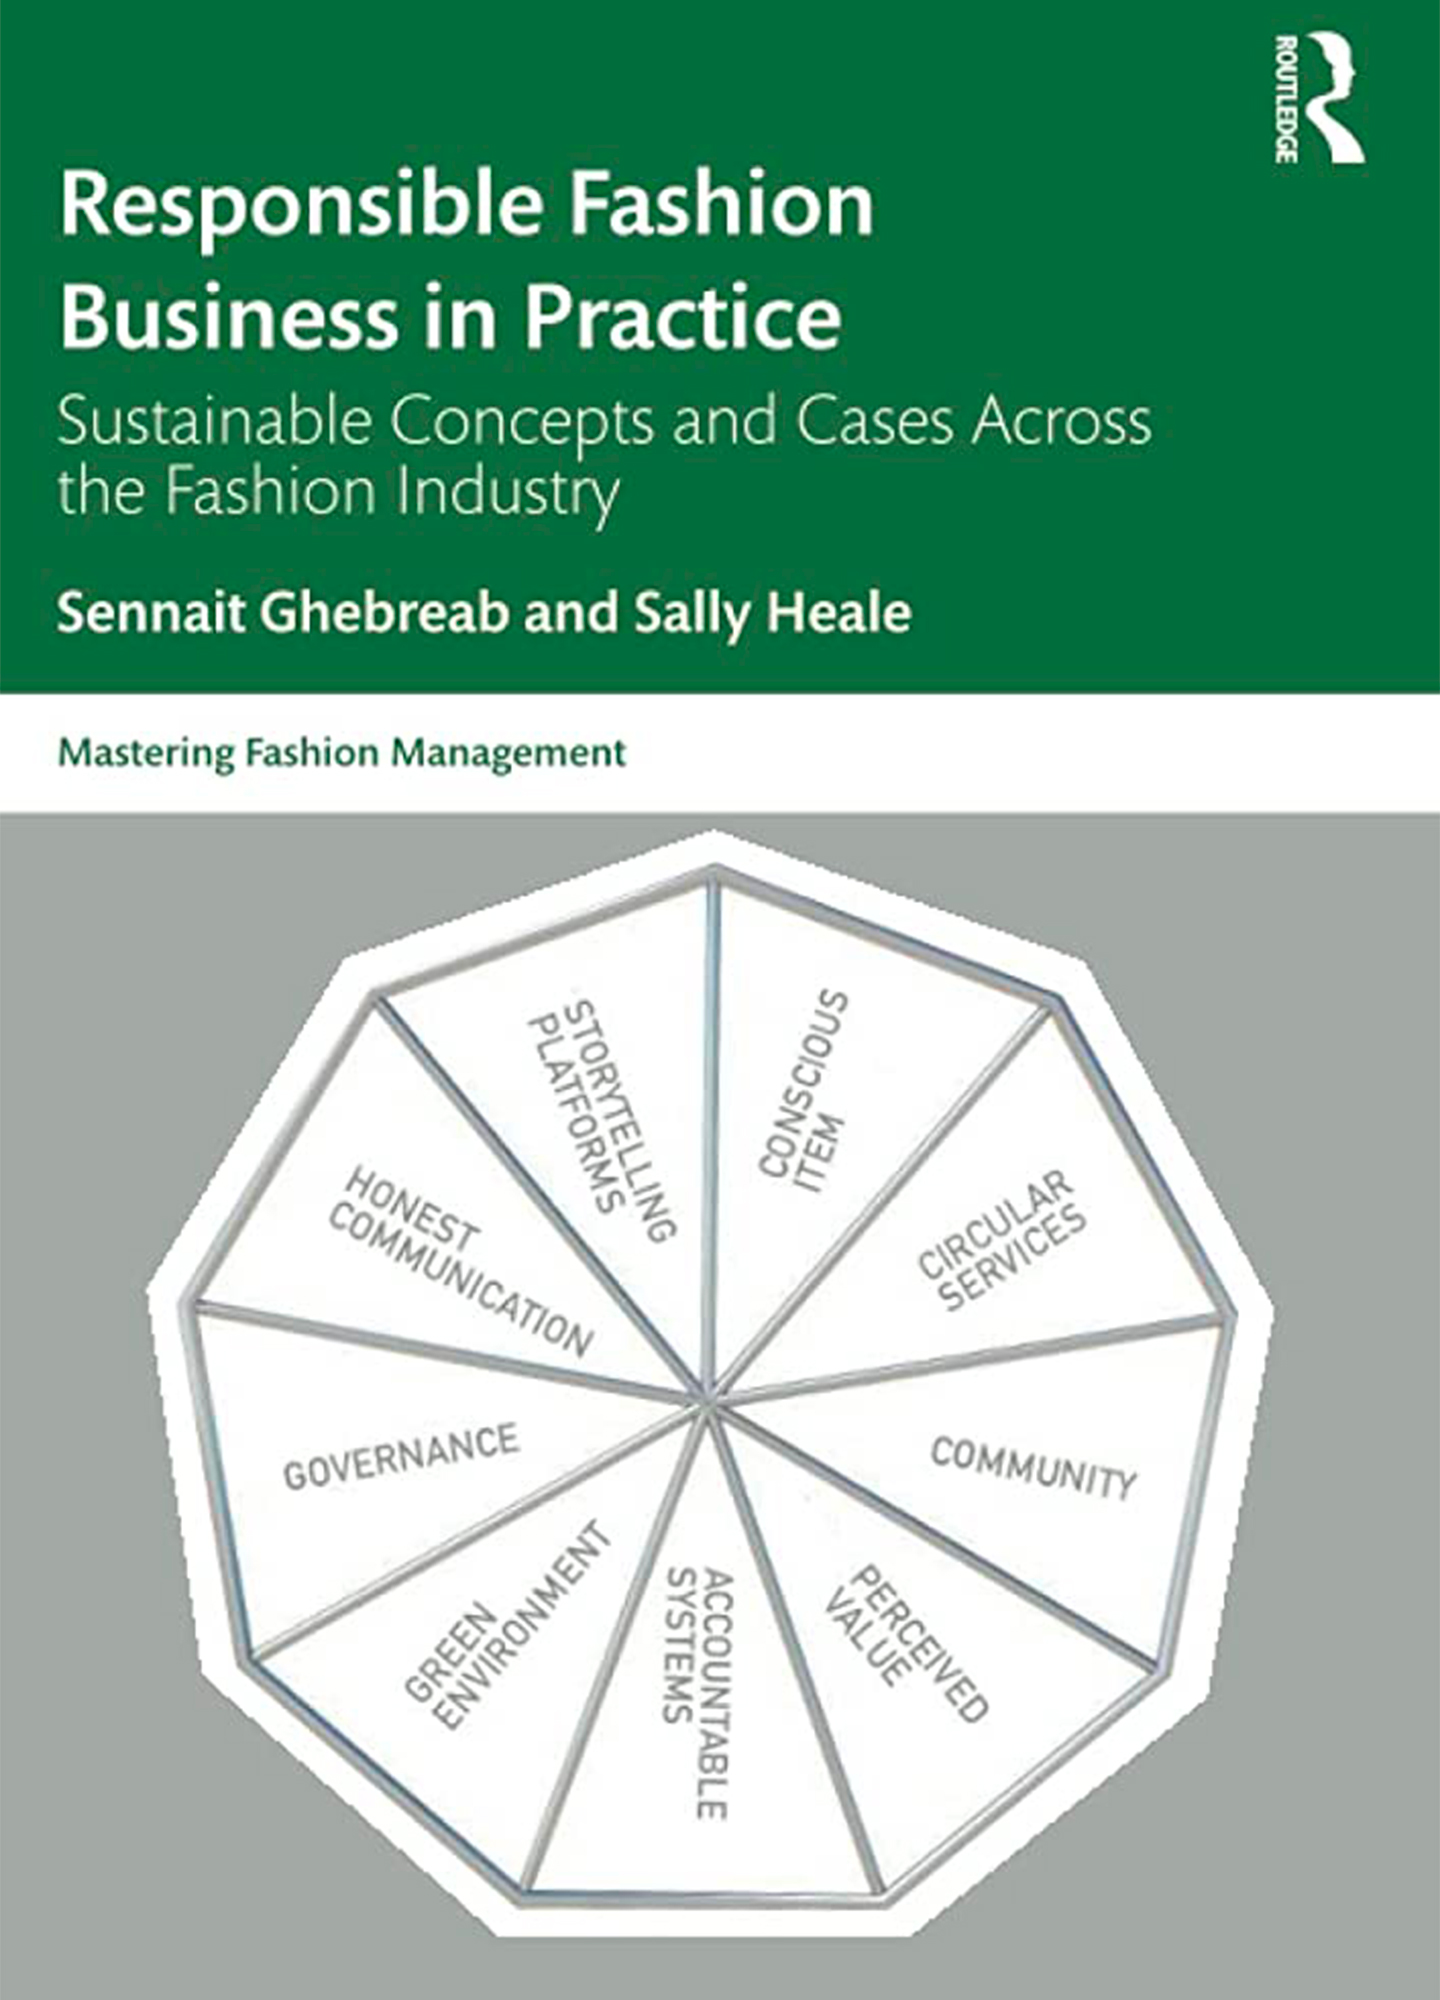 Ghebreab, S. and Heale, S. (2023) Responsible Fashion Business in Practice: Sustainable Concepts and Cases across the Fashion Industry. Mastering Fashion Management. London: Routledge